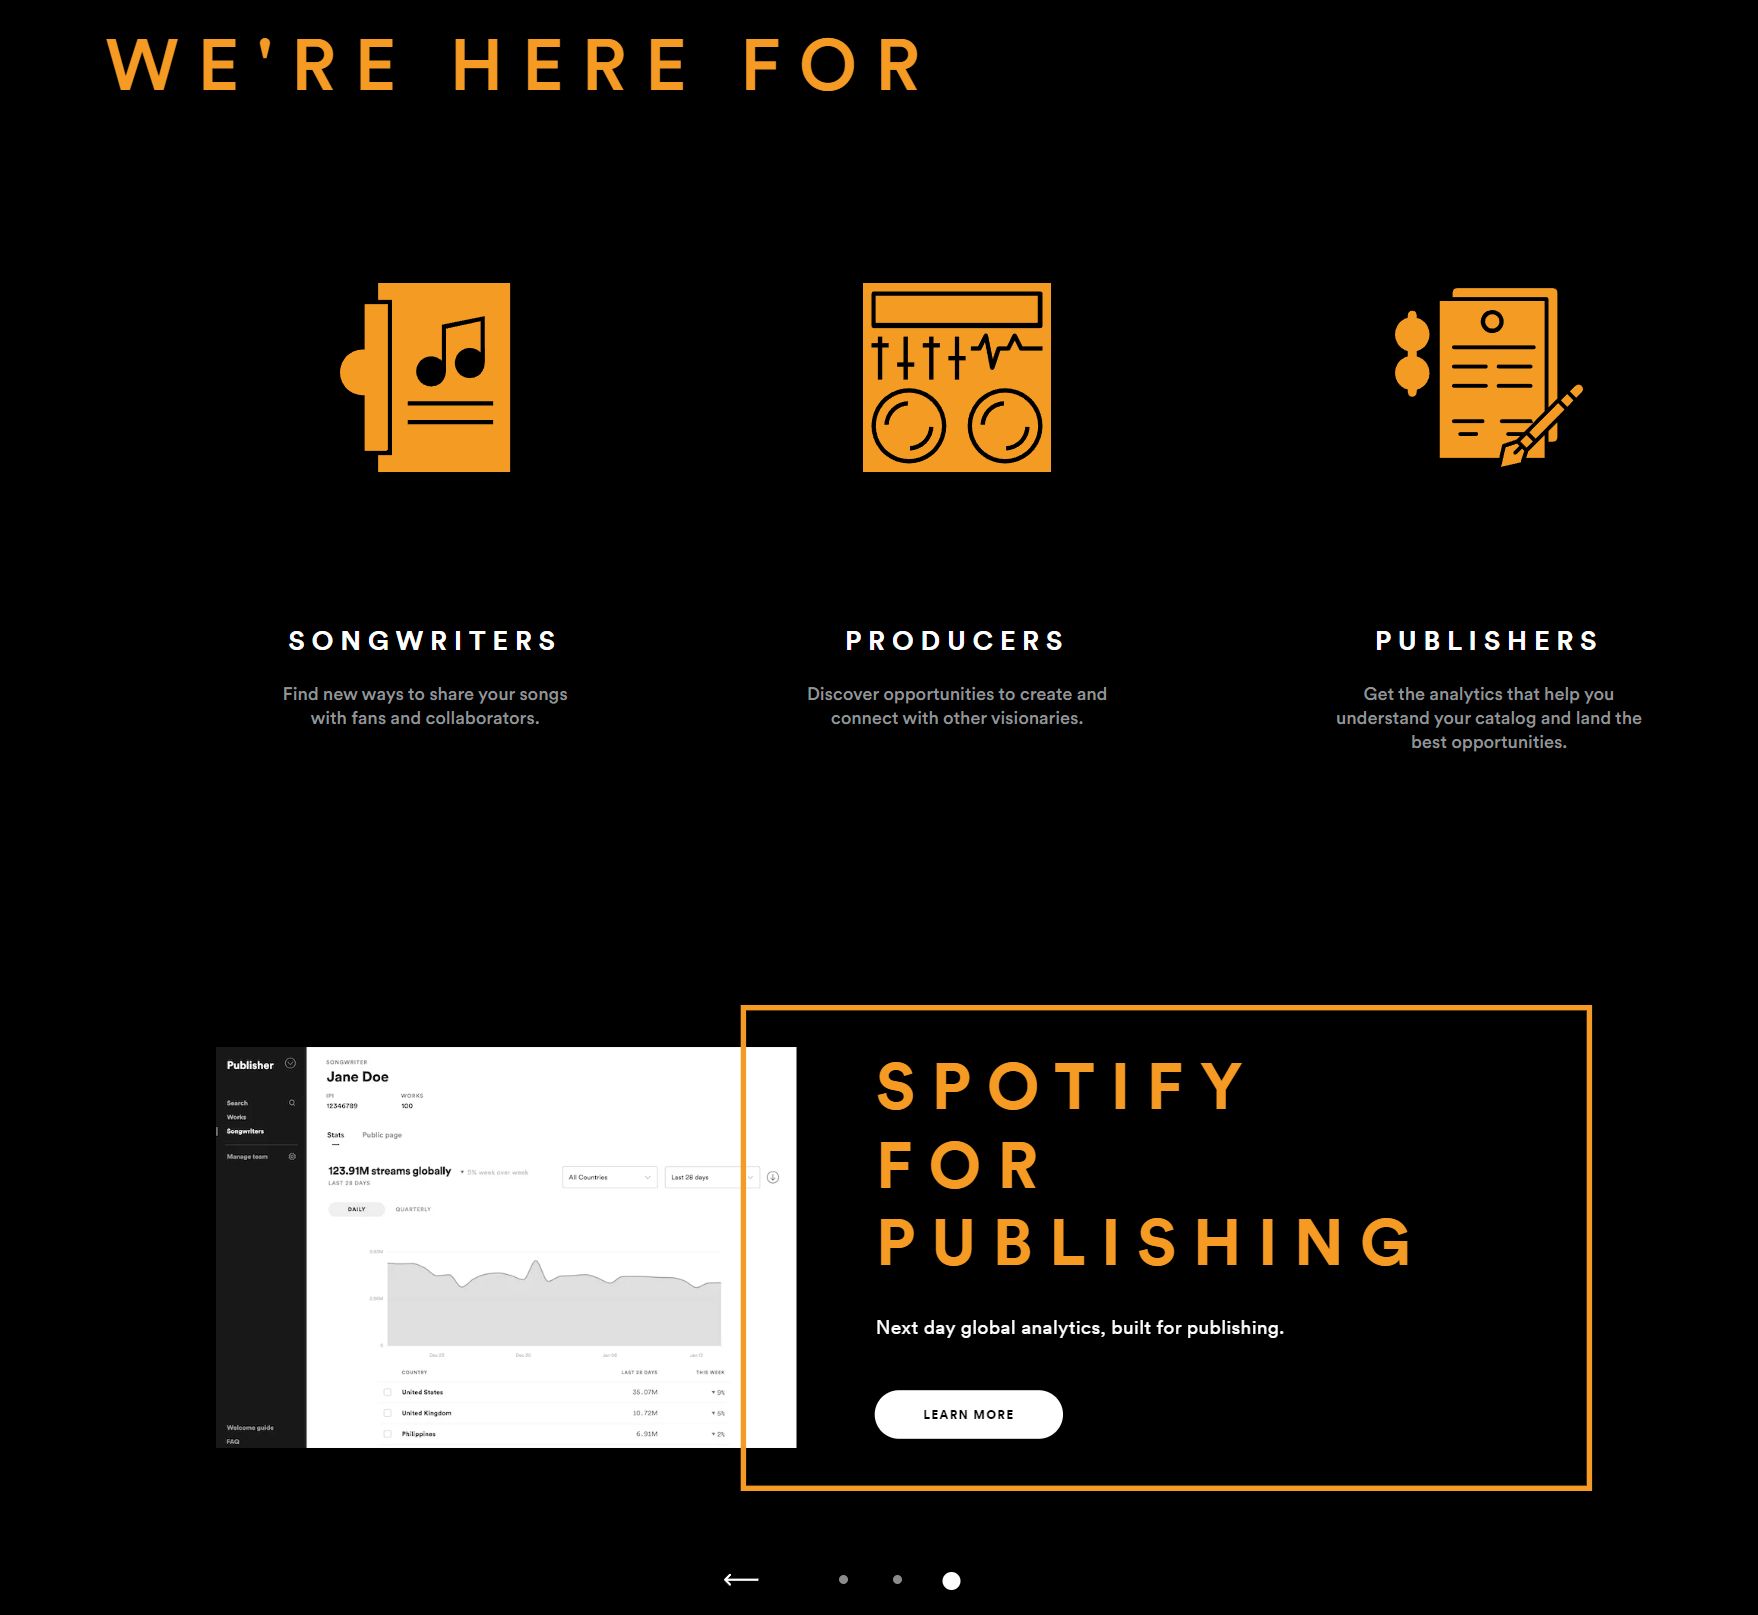 Spotify for publishing